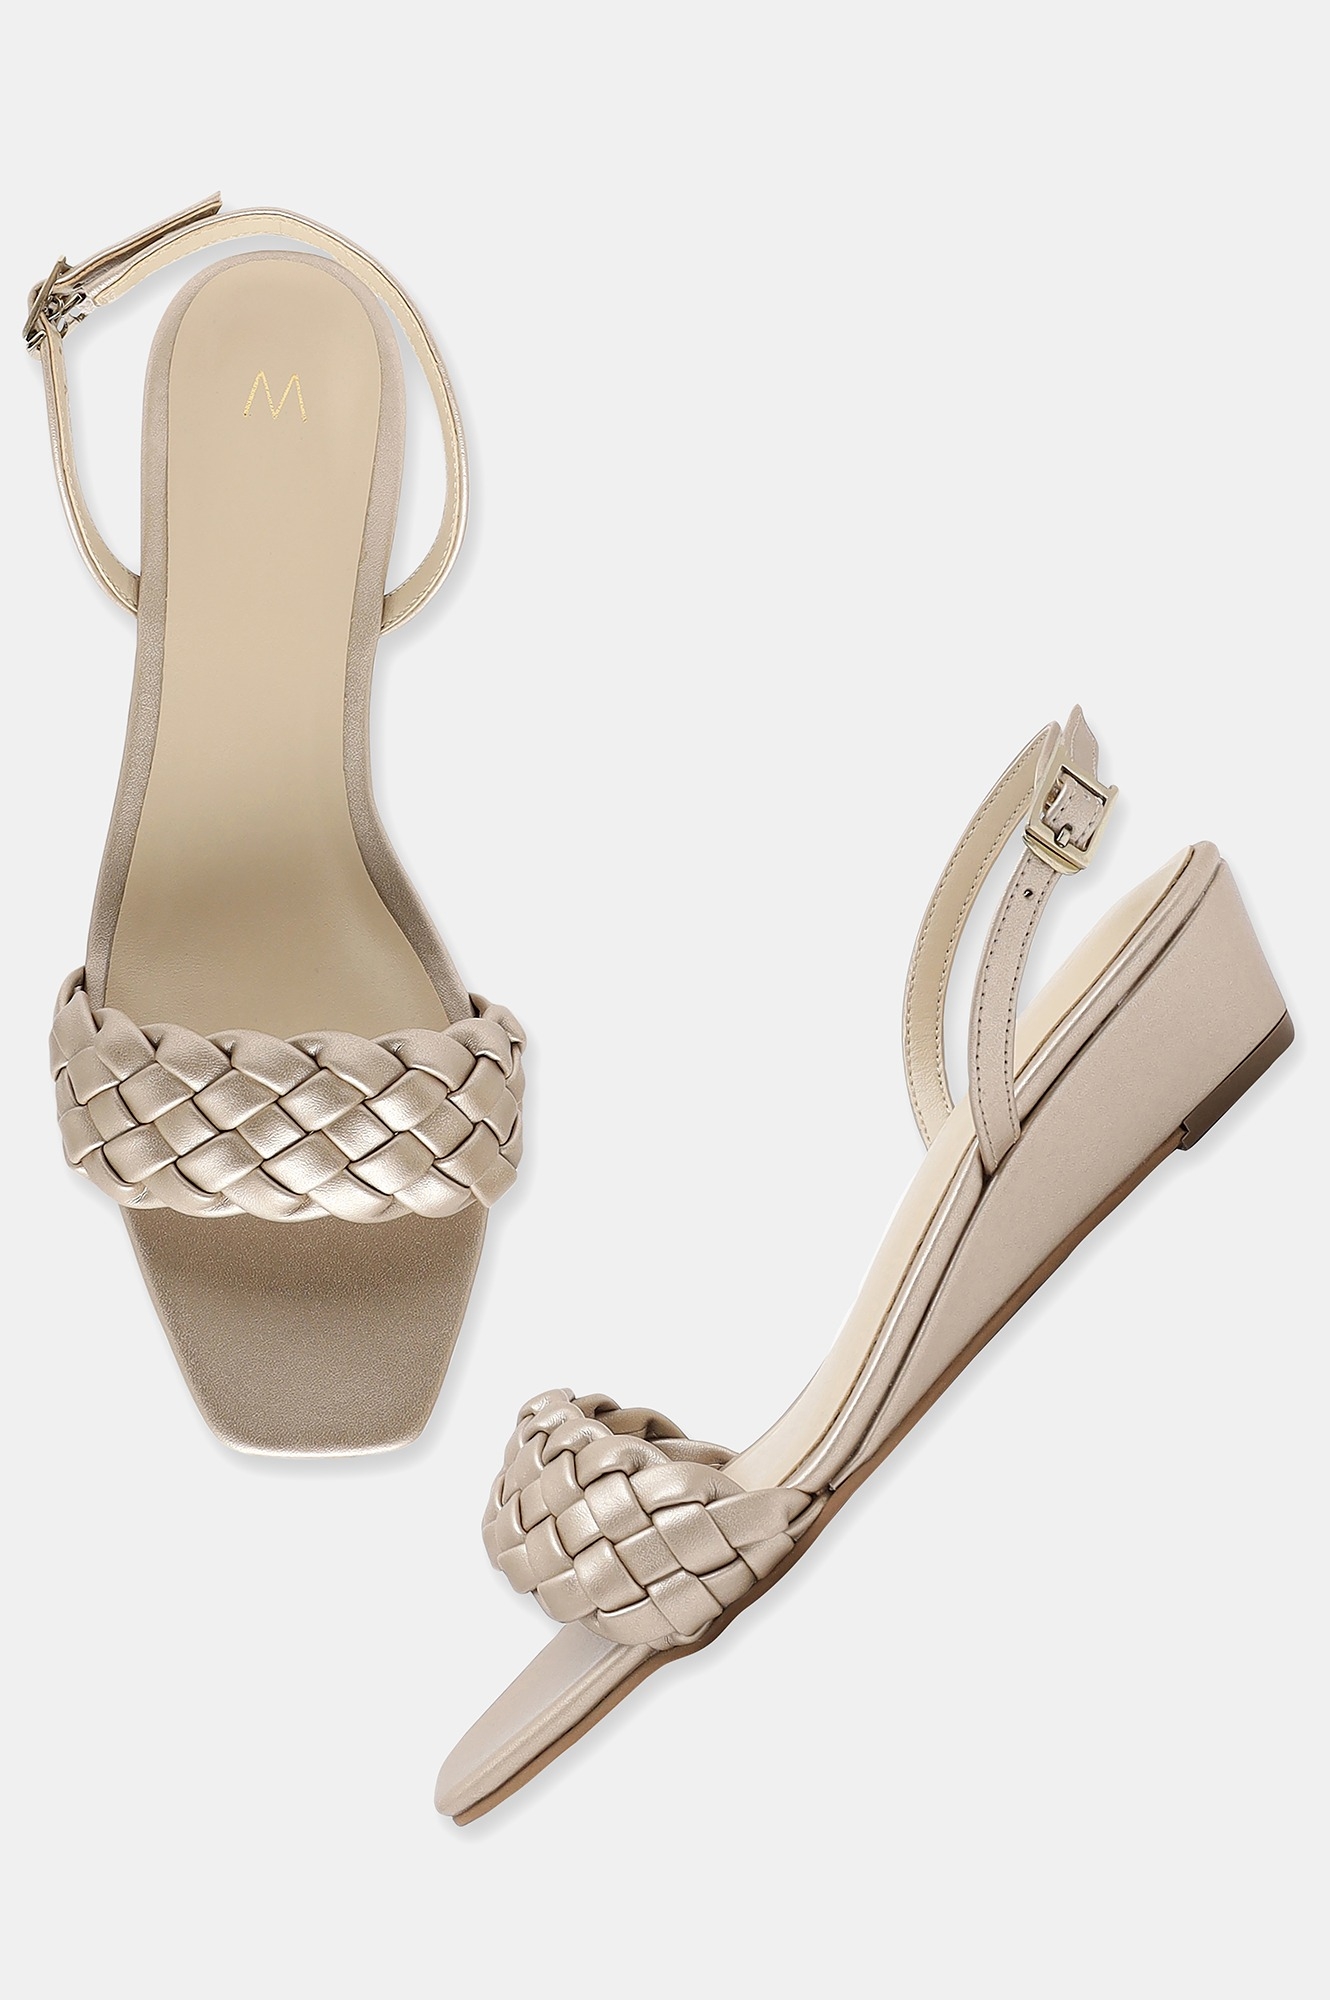 W | W Gold Woven Design Wedge